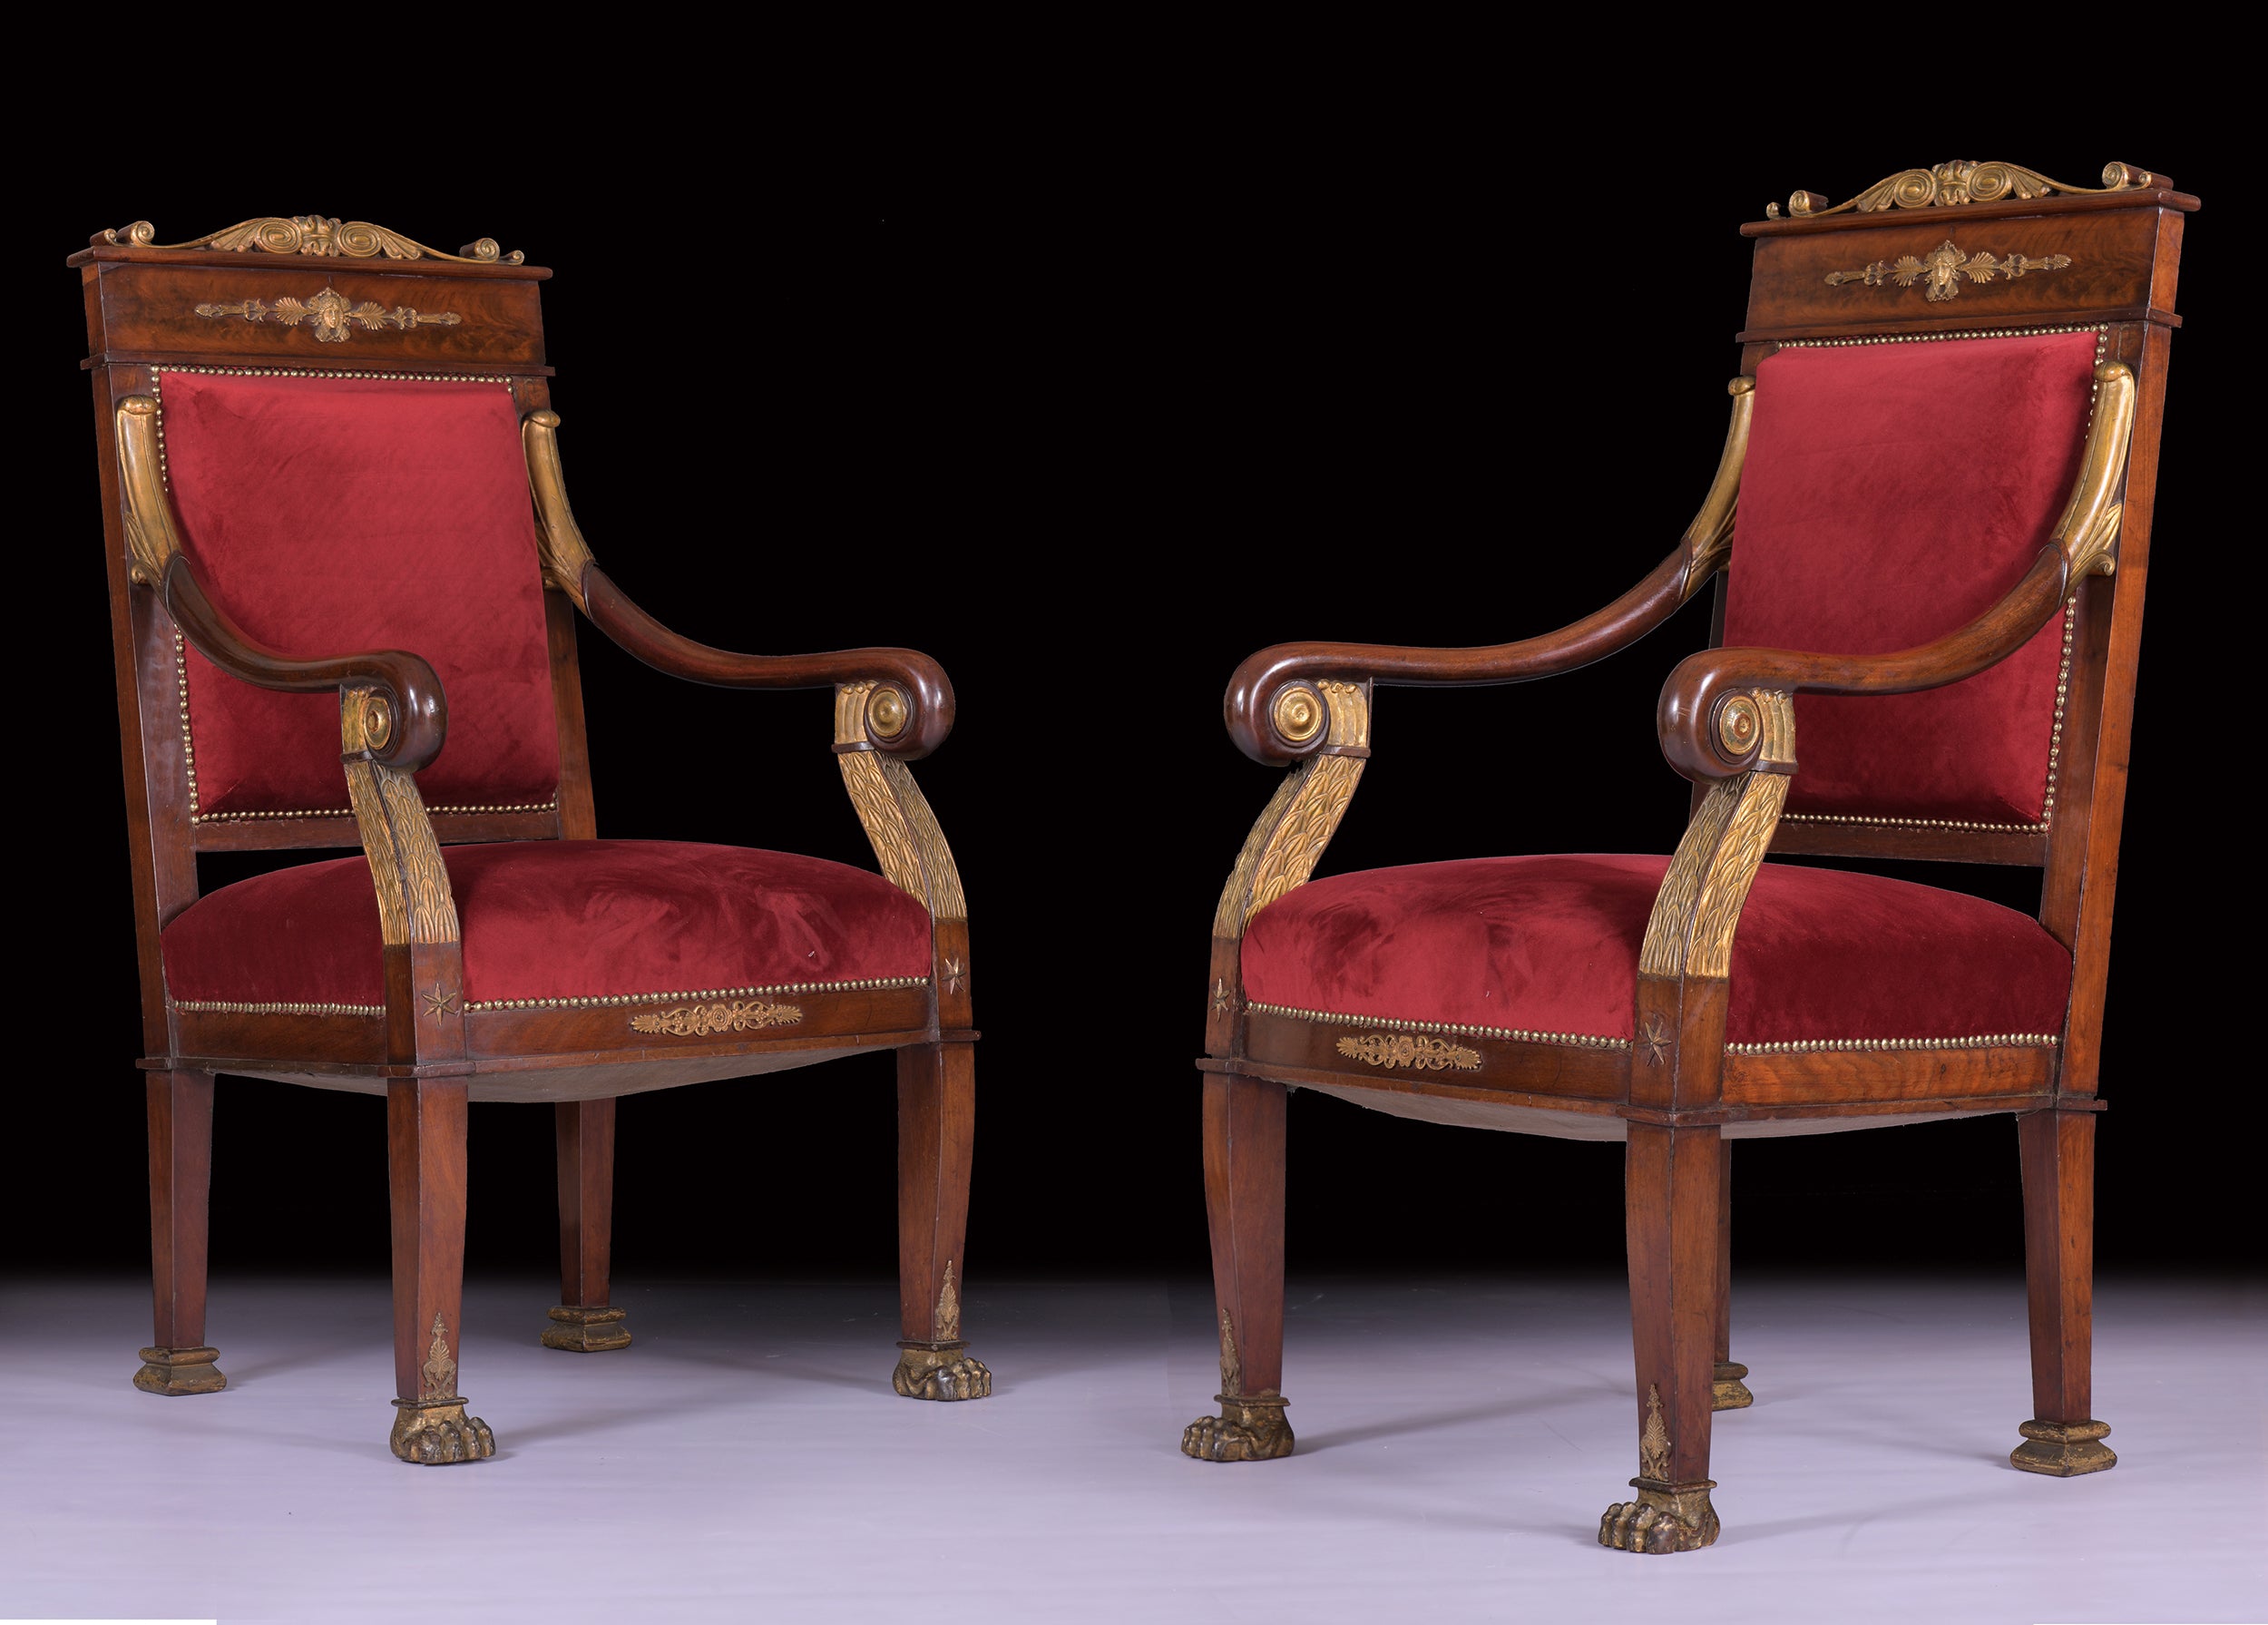 PAIR OF FRENCH EMPIRE ARMCHAIRS ATTRIBUTED TO JACOB-DESMALTER    - REF No. 8023